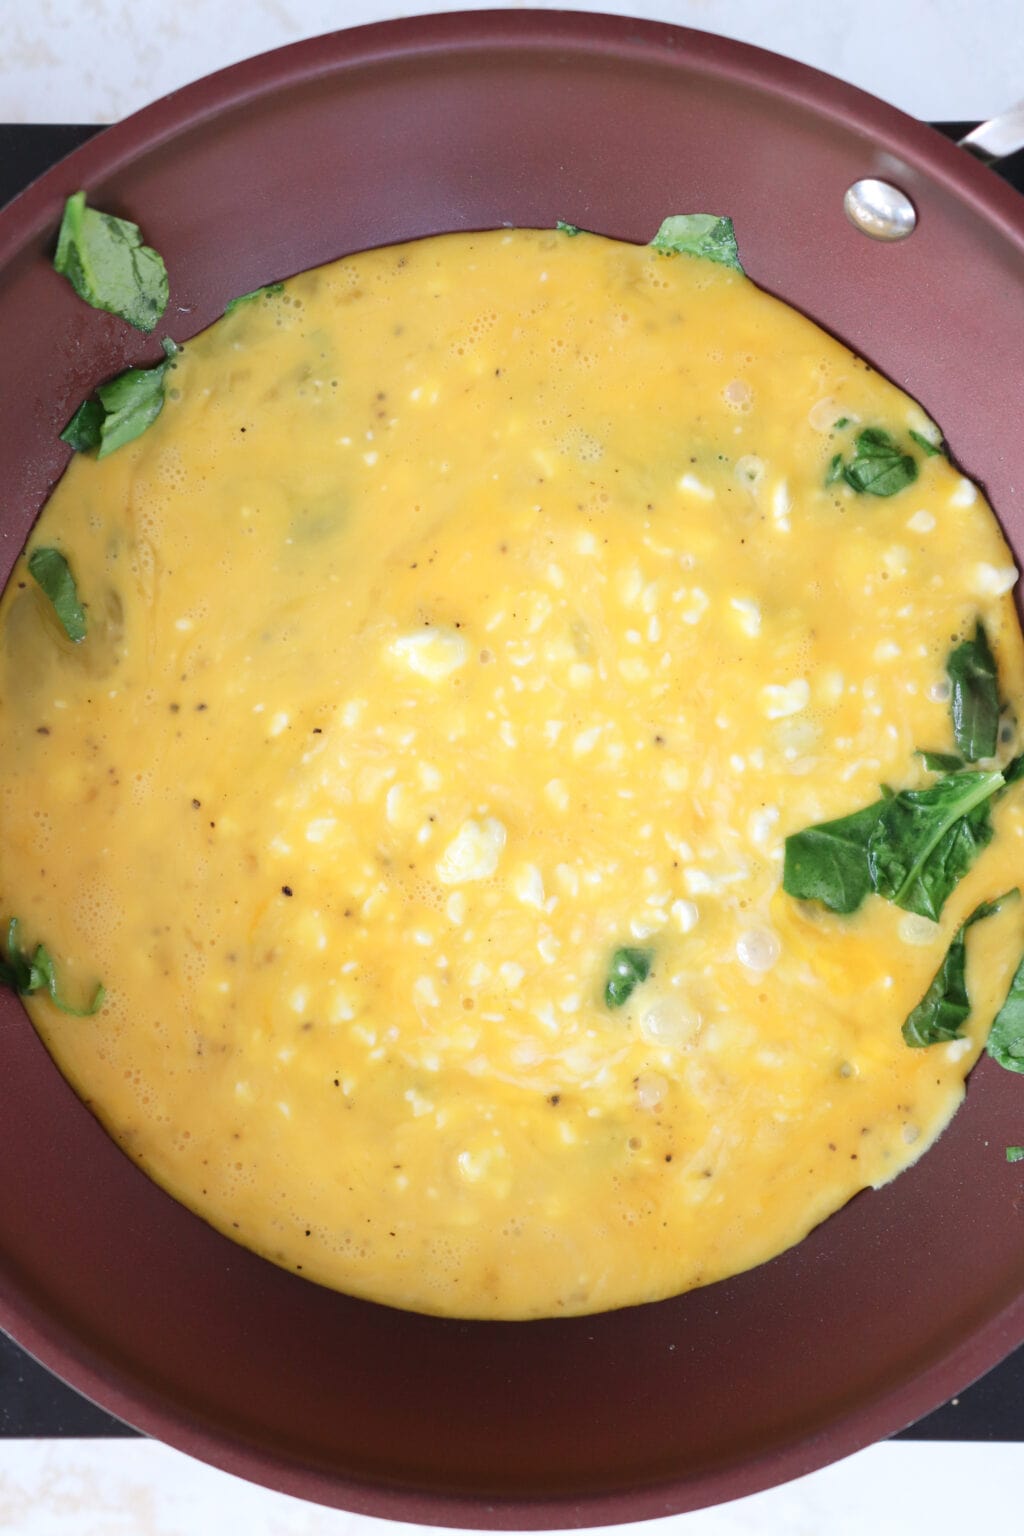 Uncooked scrambled eggs with spinach being cooked in a frying pan